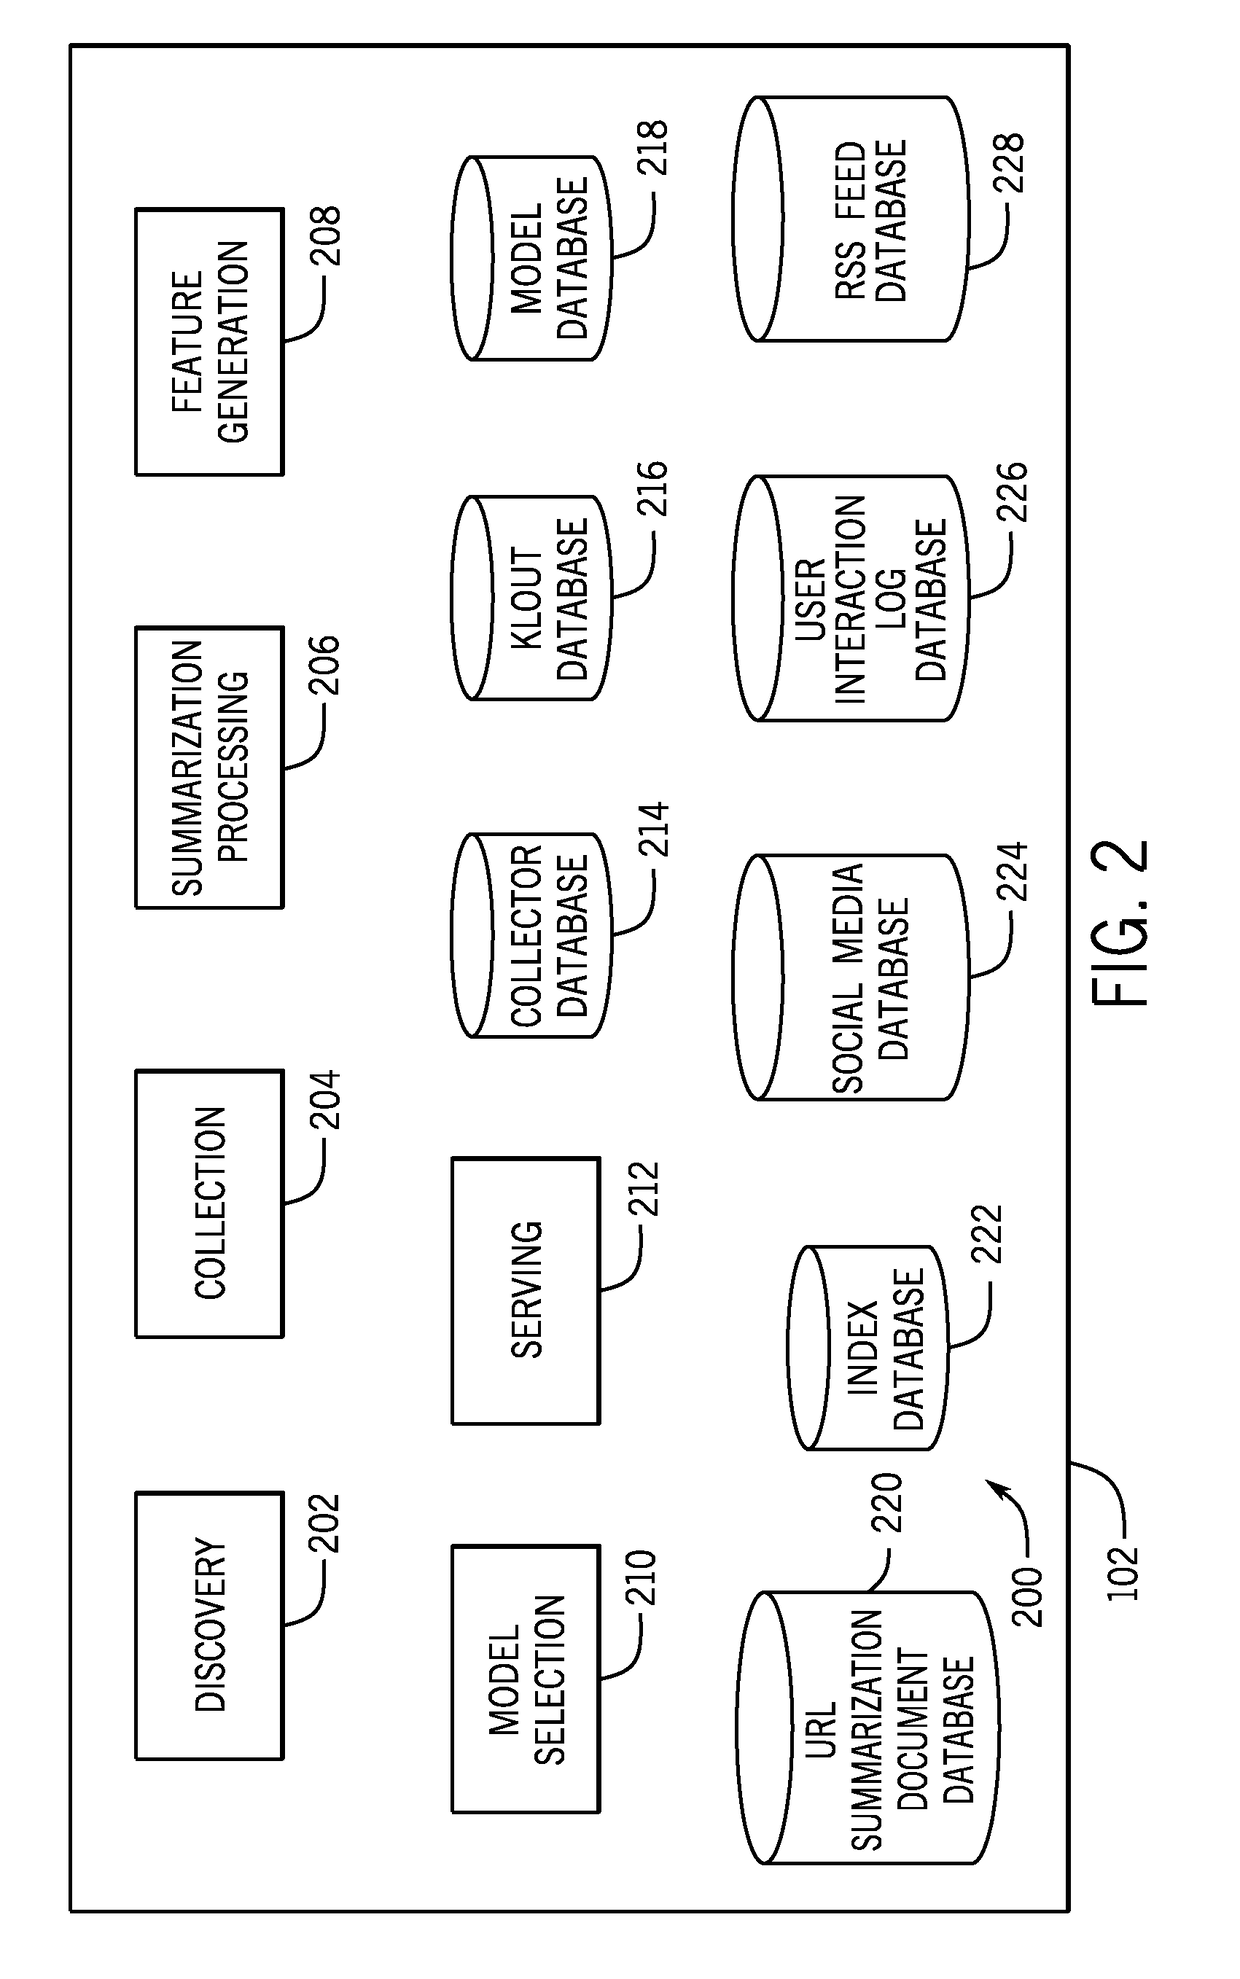 System and method of providing a content discovery platform for optimizing social network engagements